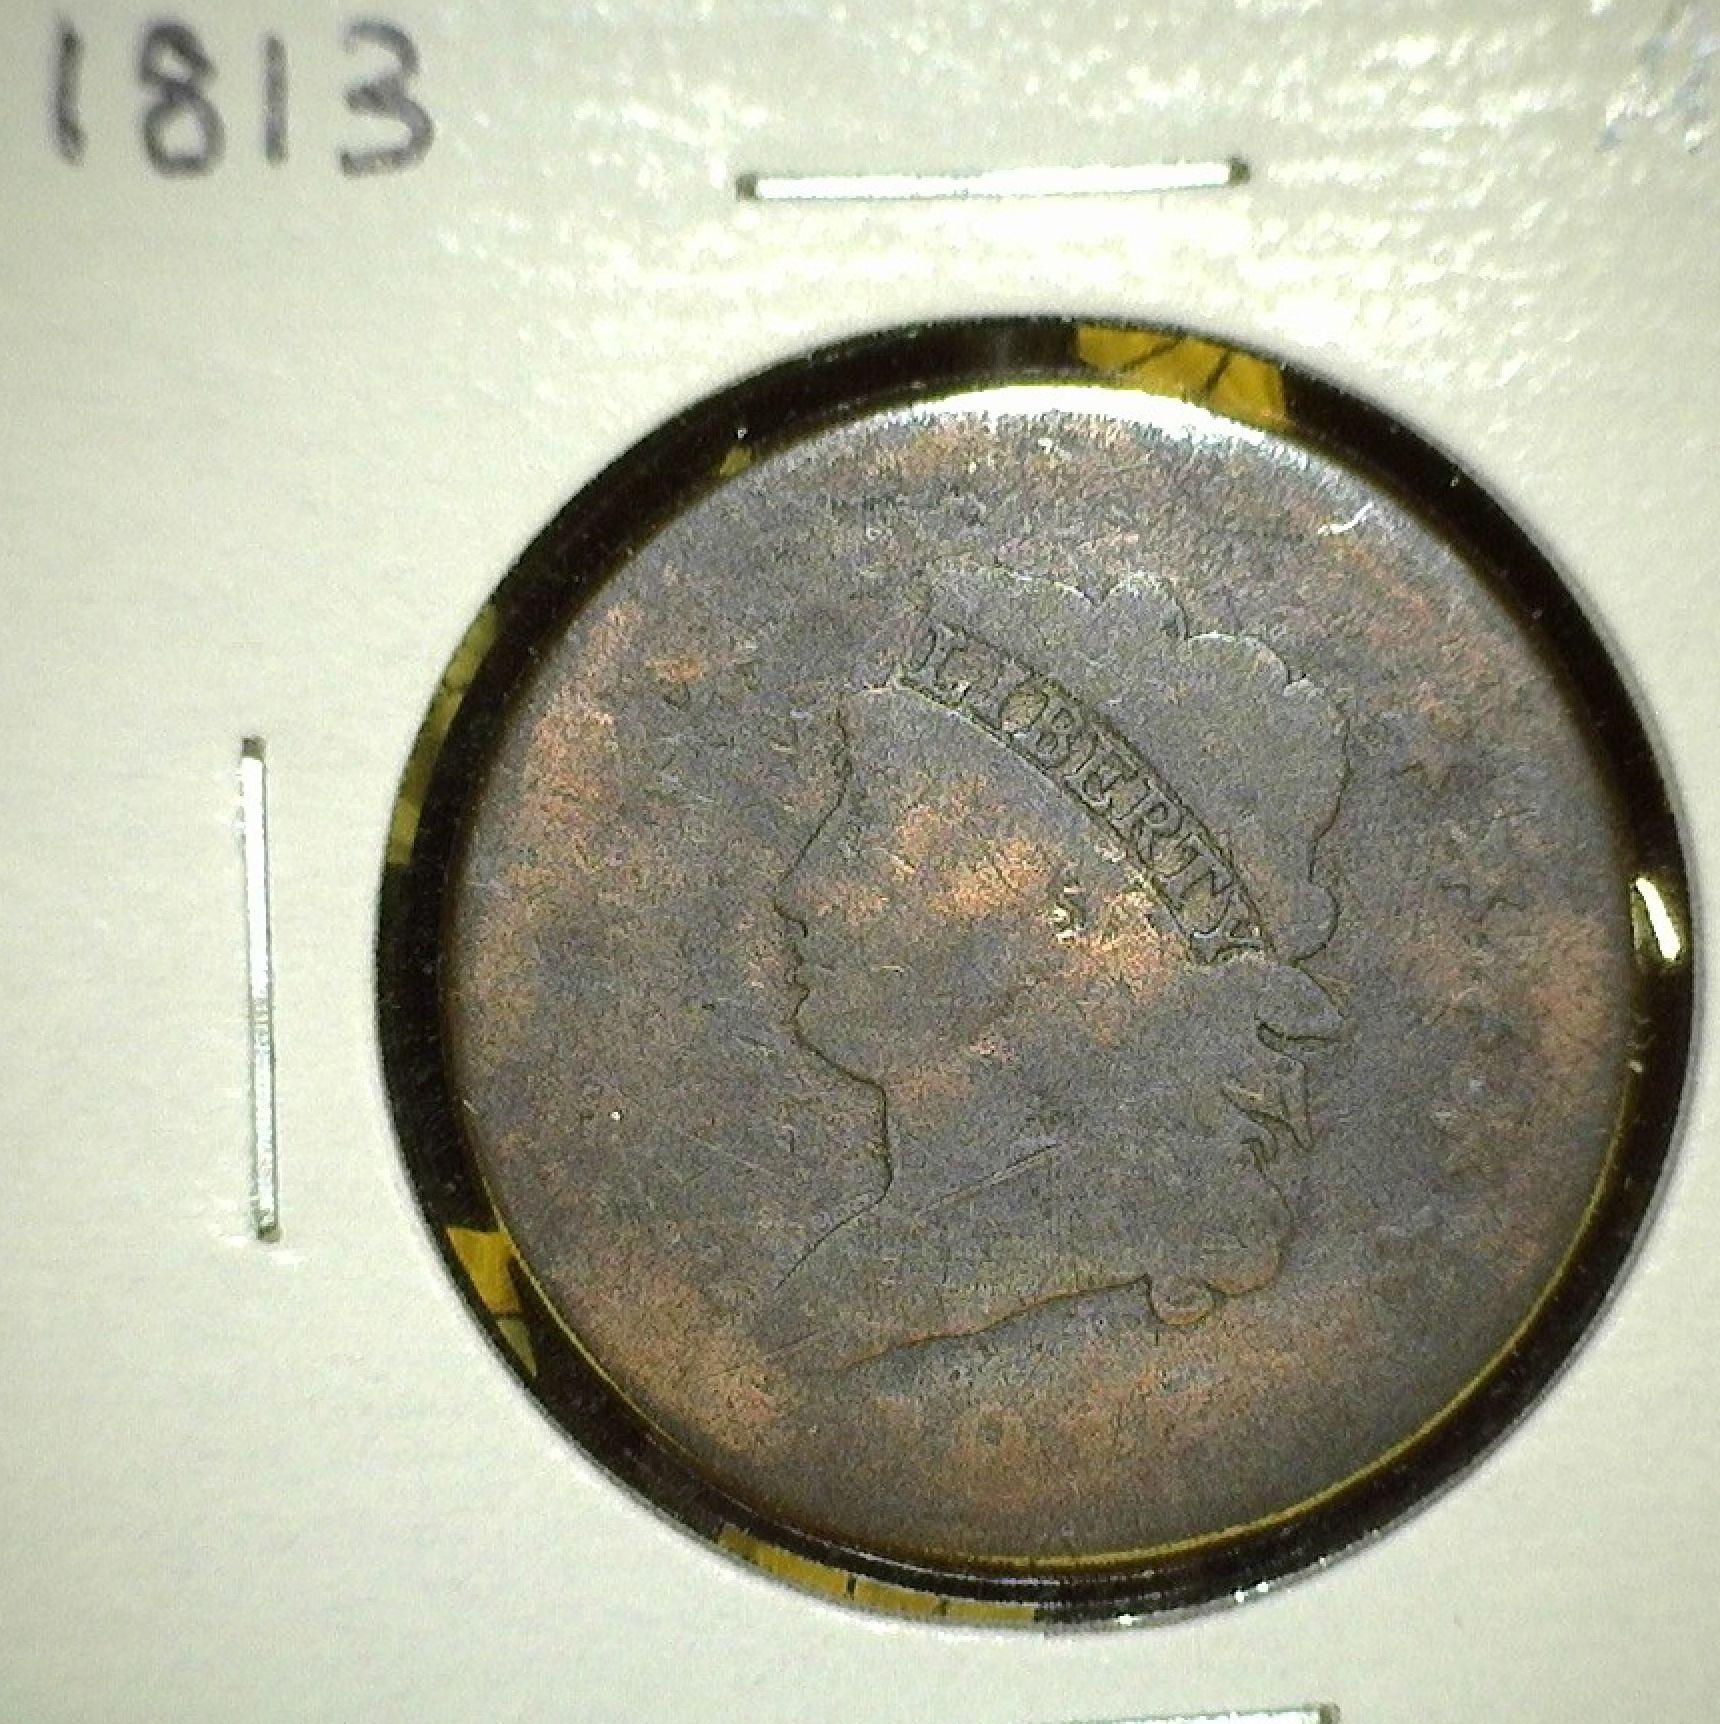 Two Classic Head U.S. Large Cents: 1812 Good with digs & porous, & 1813 AG.